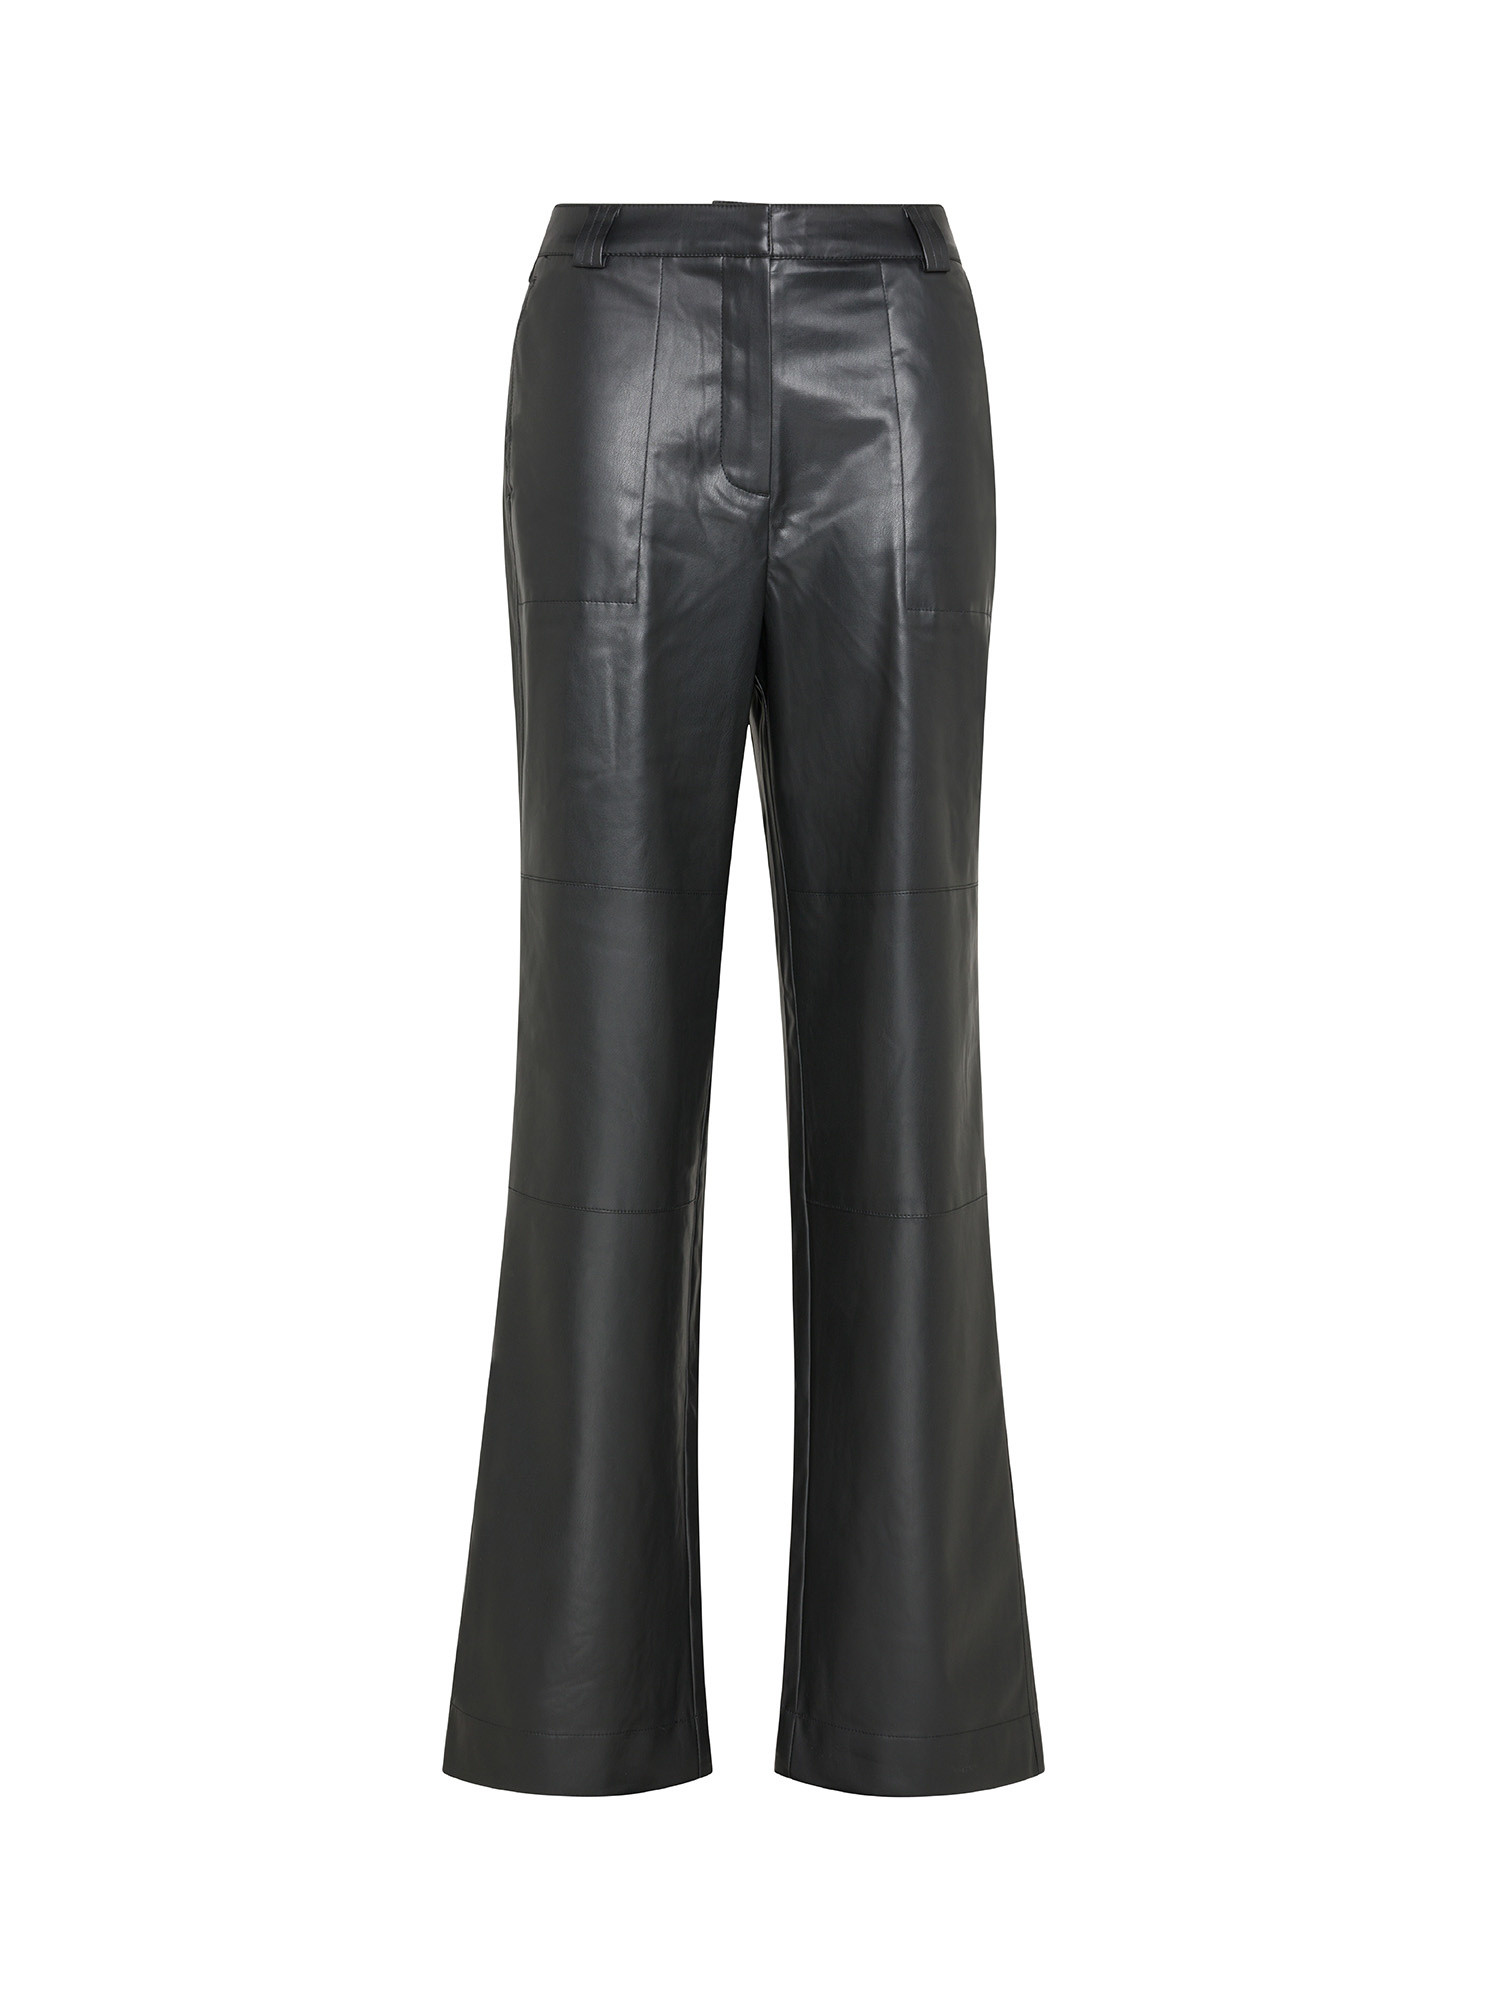 Faux leather trousers, Black, large image number 0